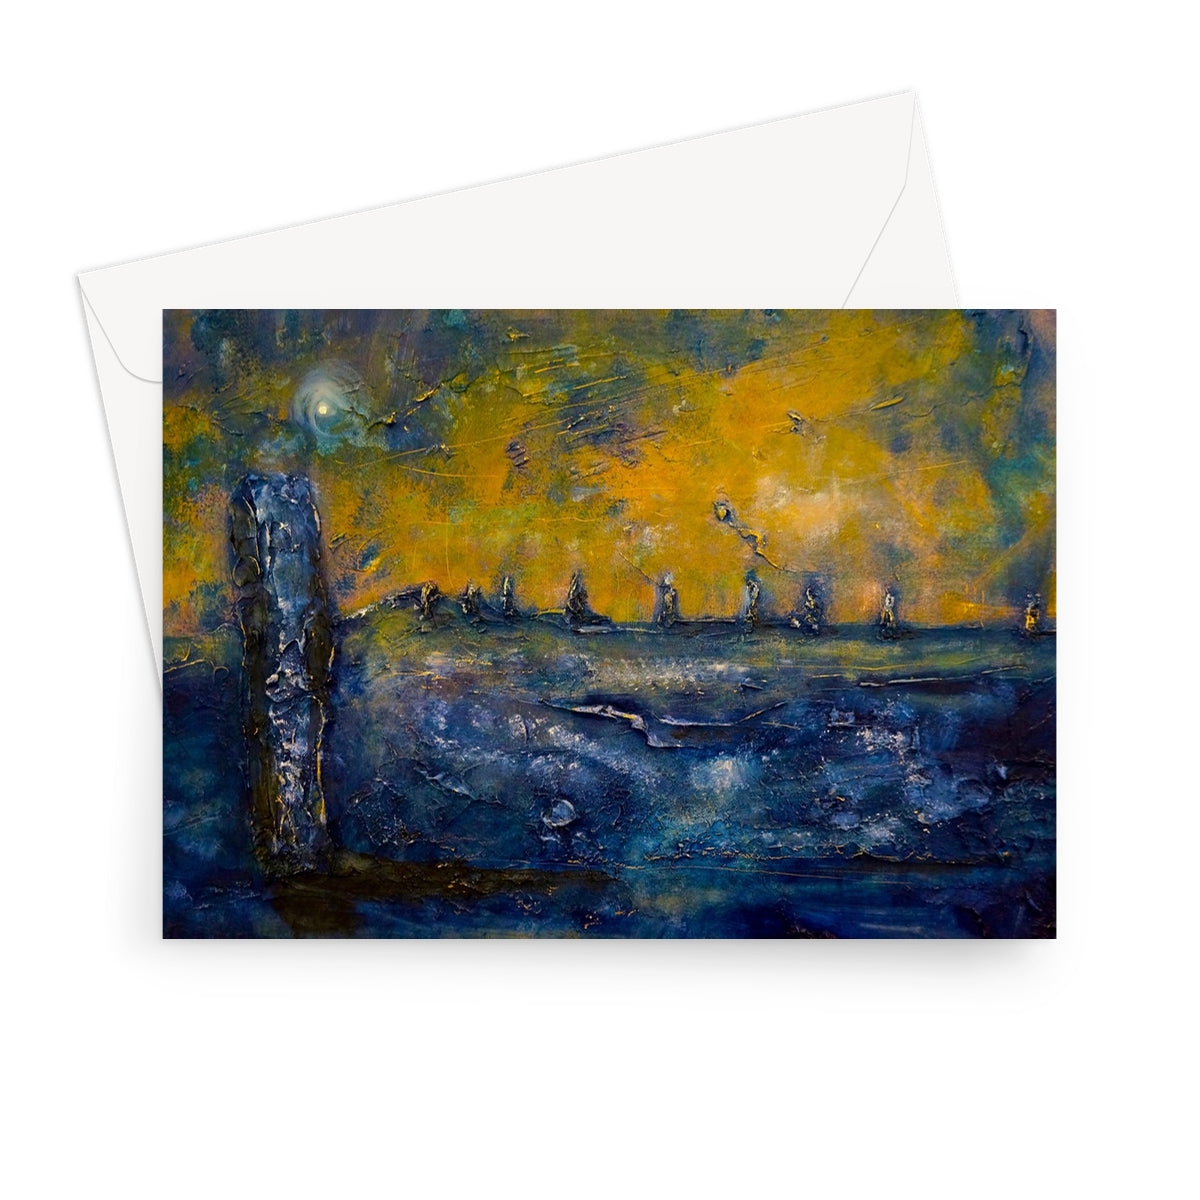 Brodgar Moonlight Orkney Art Gifts Greeting Card-Greetings Cards-Orkney Art Gallery-7"x5"-1 Card-Paintings, Prints, Homeware, Art Gifts From Scotland By Scottish Artist Kevin Hunter